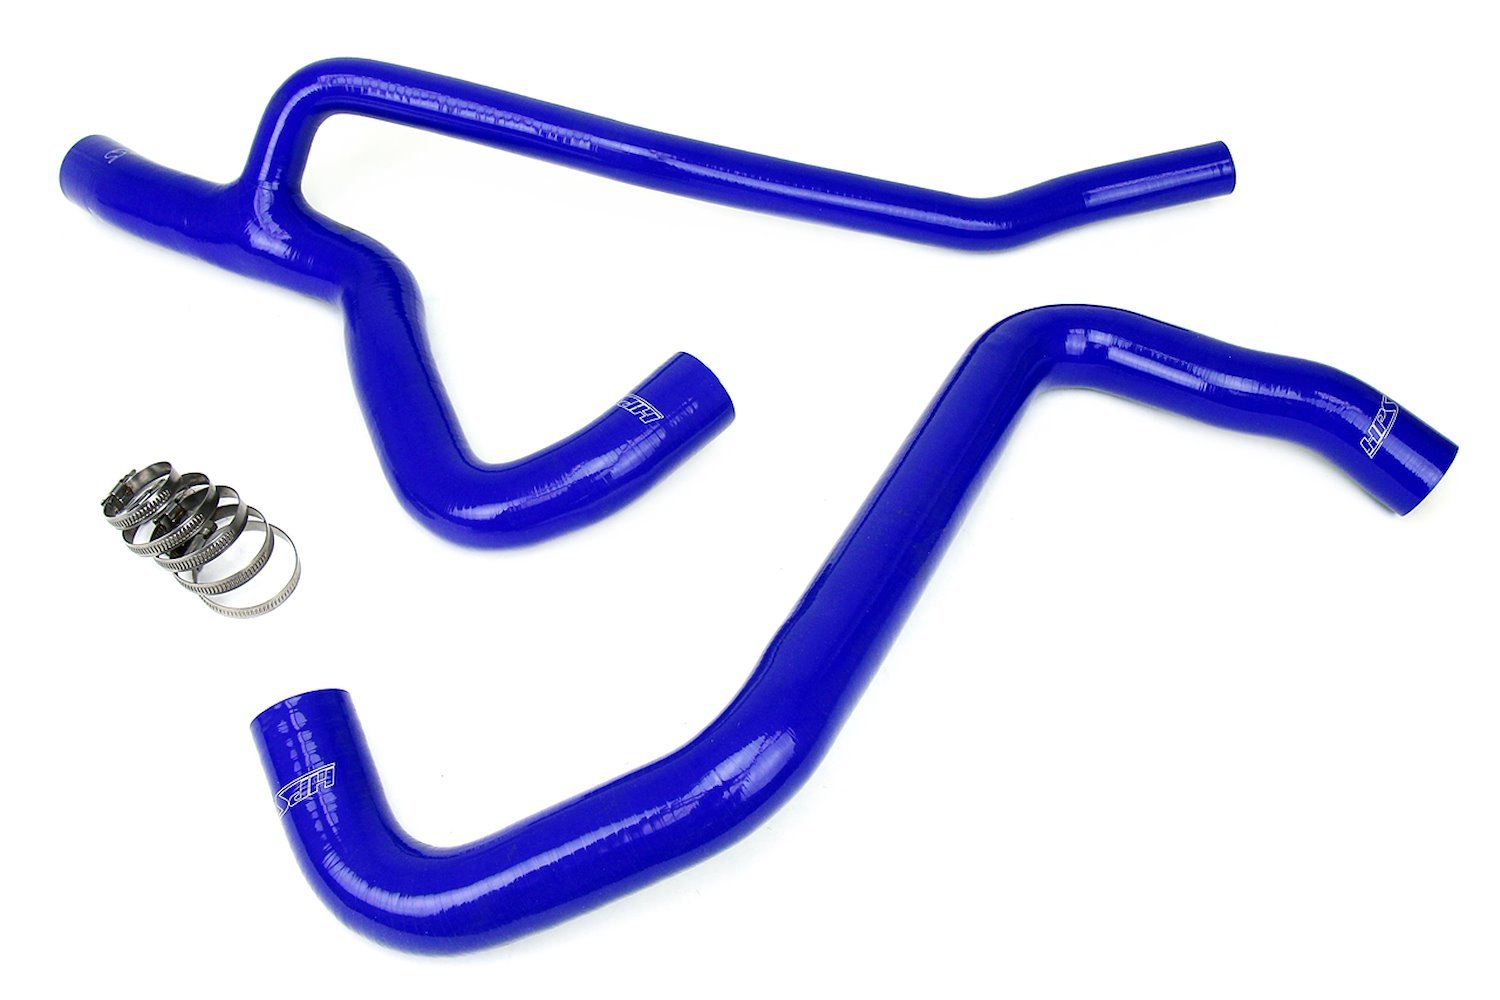 57-1014-BLUE Radiator Hose Kit, High-Temp 3-Ply Reinforced Silicone, Replace OEM Rubber Radiator Coolant Hoses